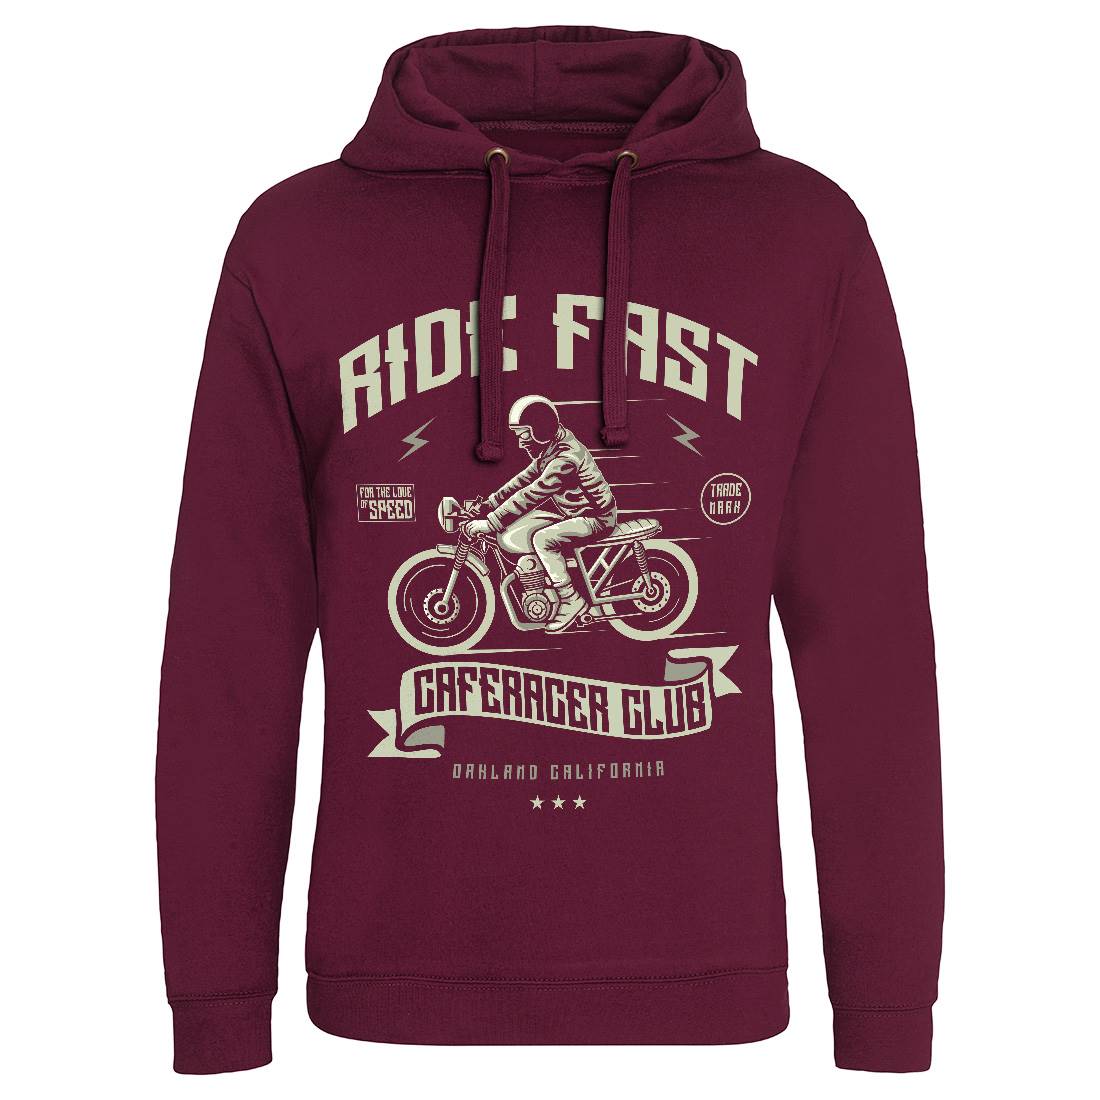 Ride Fast Mens Hoodie Without Pocket Motorcycles A117